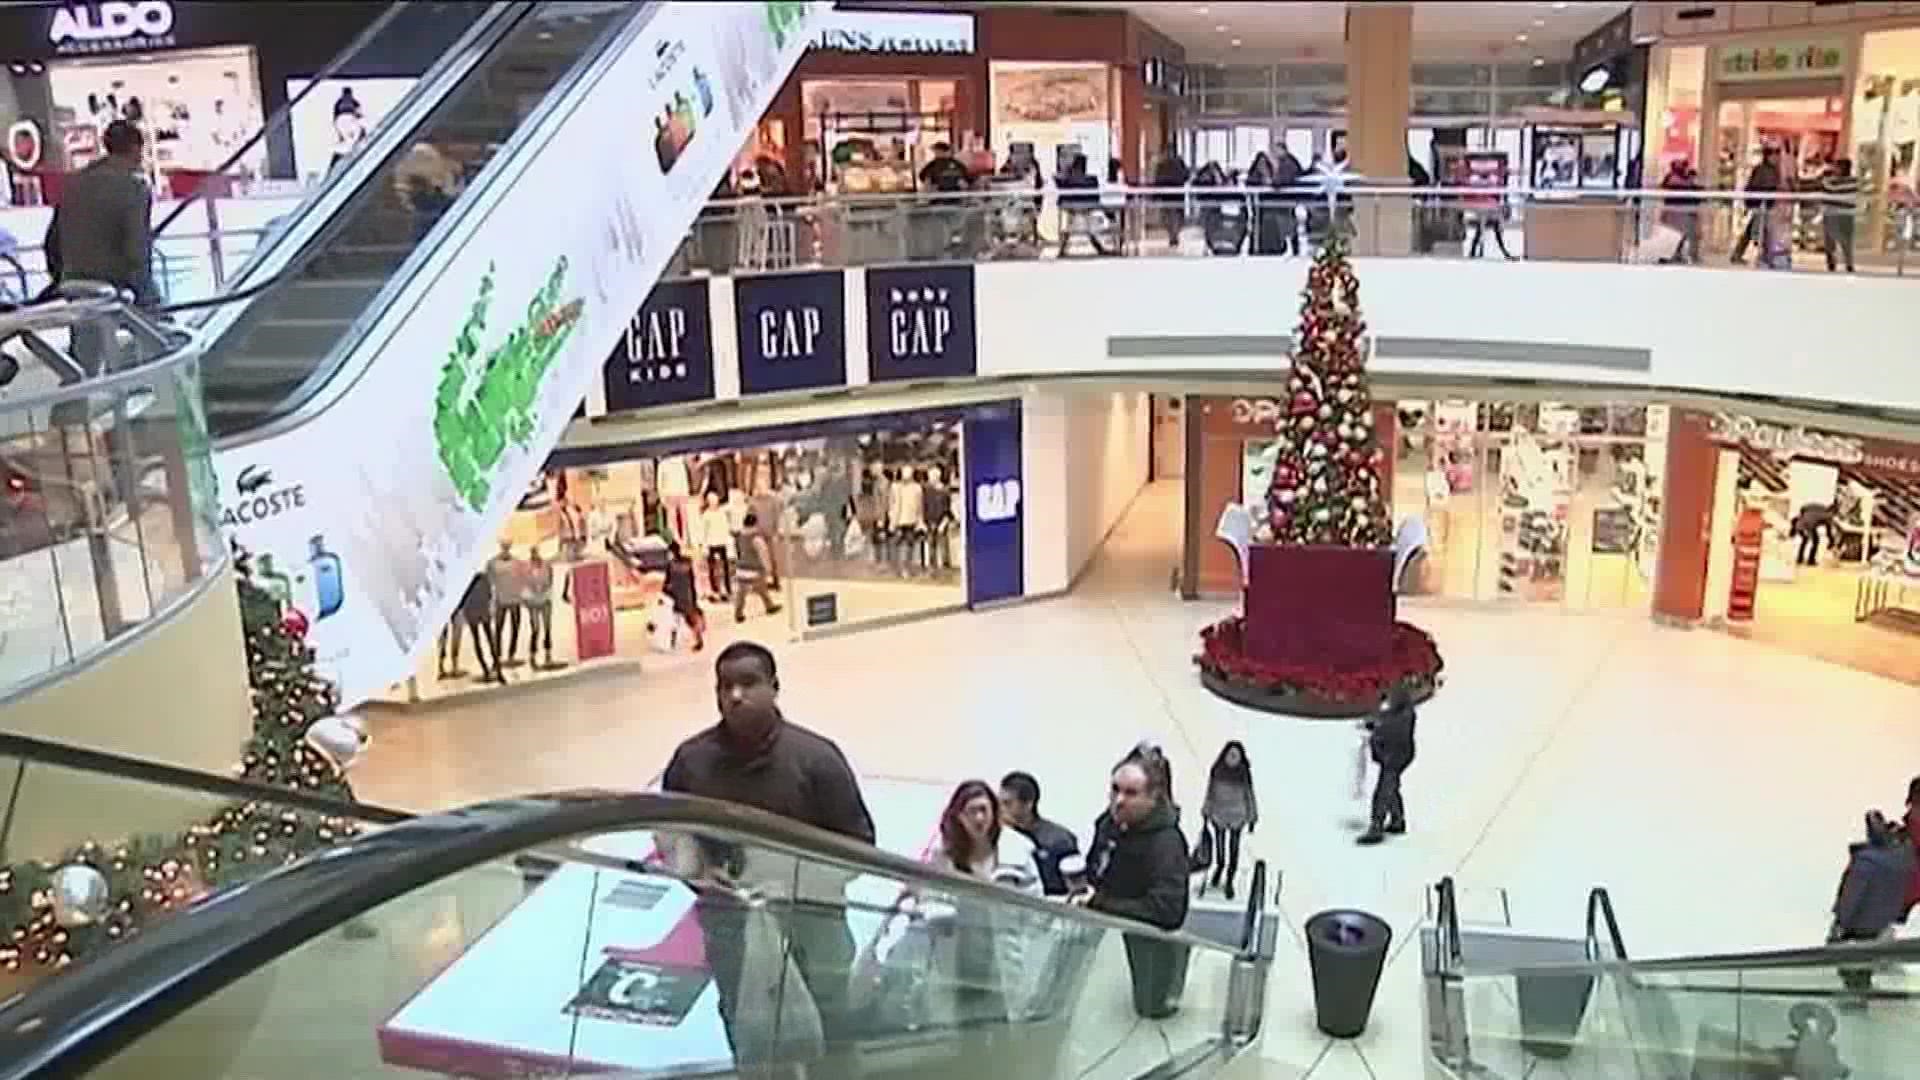 If you're worried about overspending over the holidays, here are some ways to save some money.